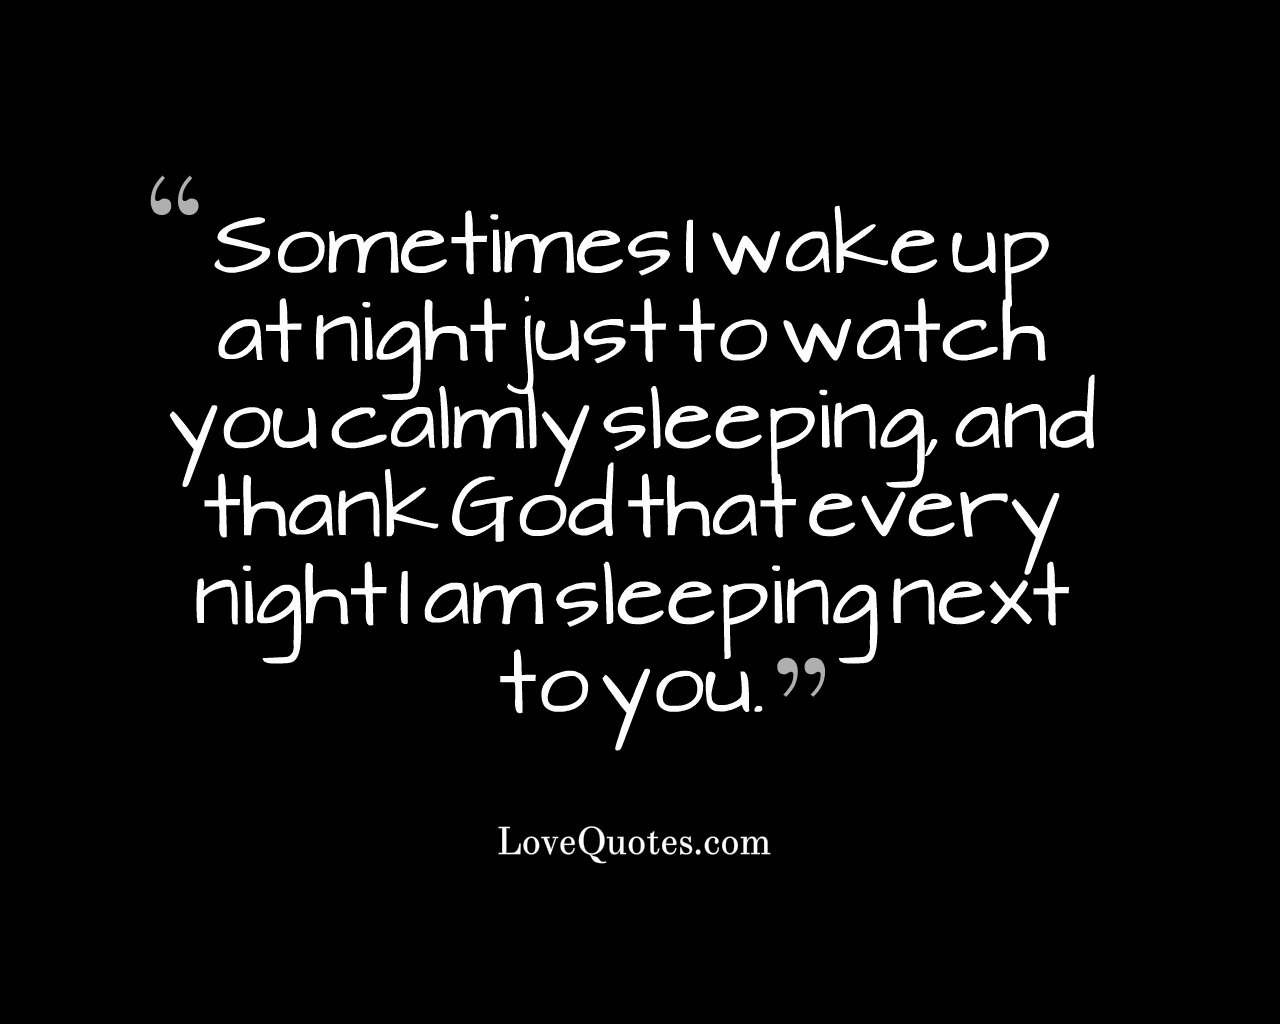 Watch You Sleeping - Love Quotes